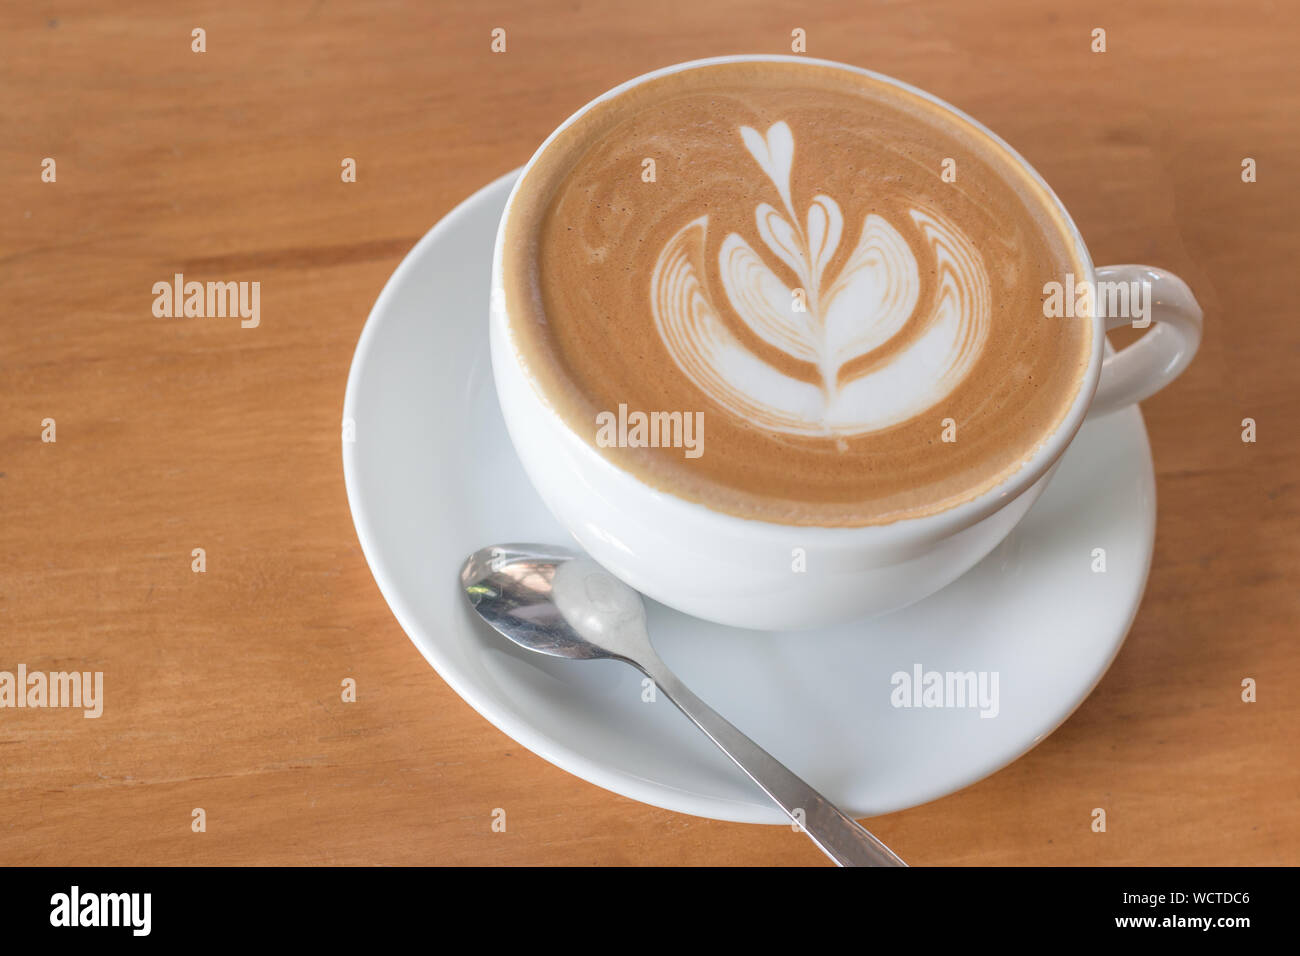 High Angle View Of Cappuccino With Froth Art On Table Stock Photo